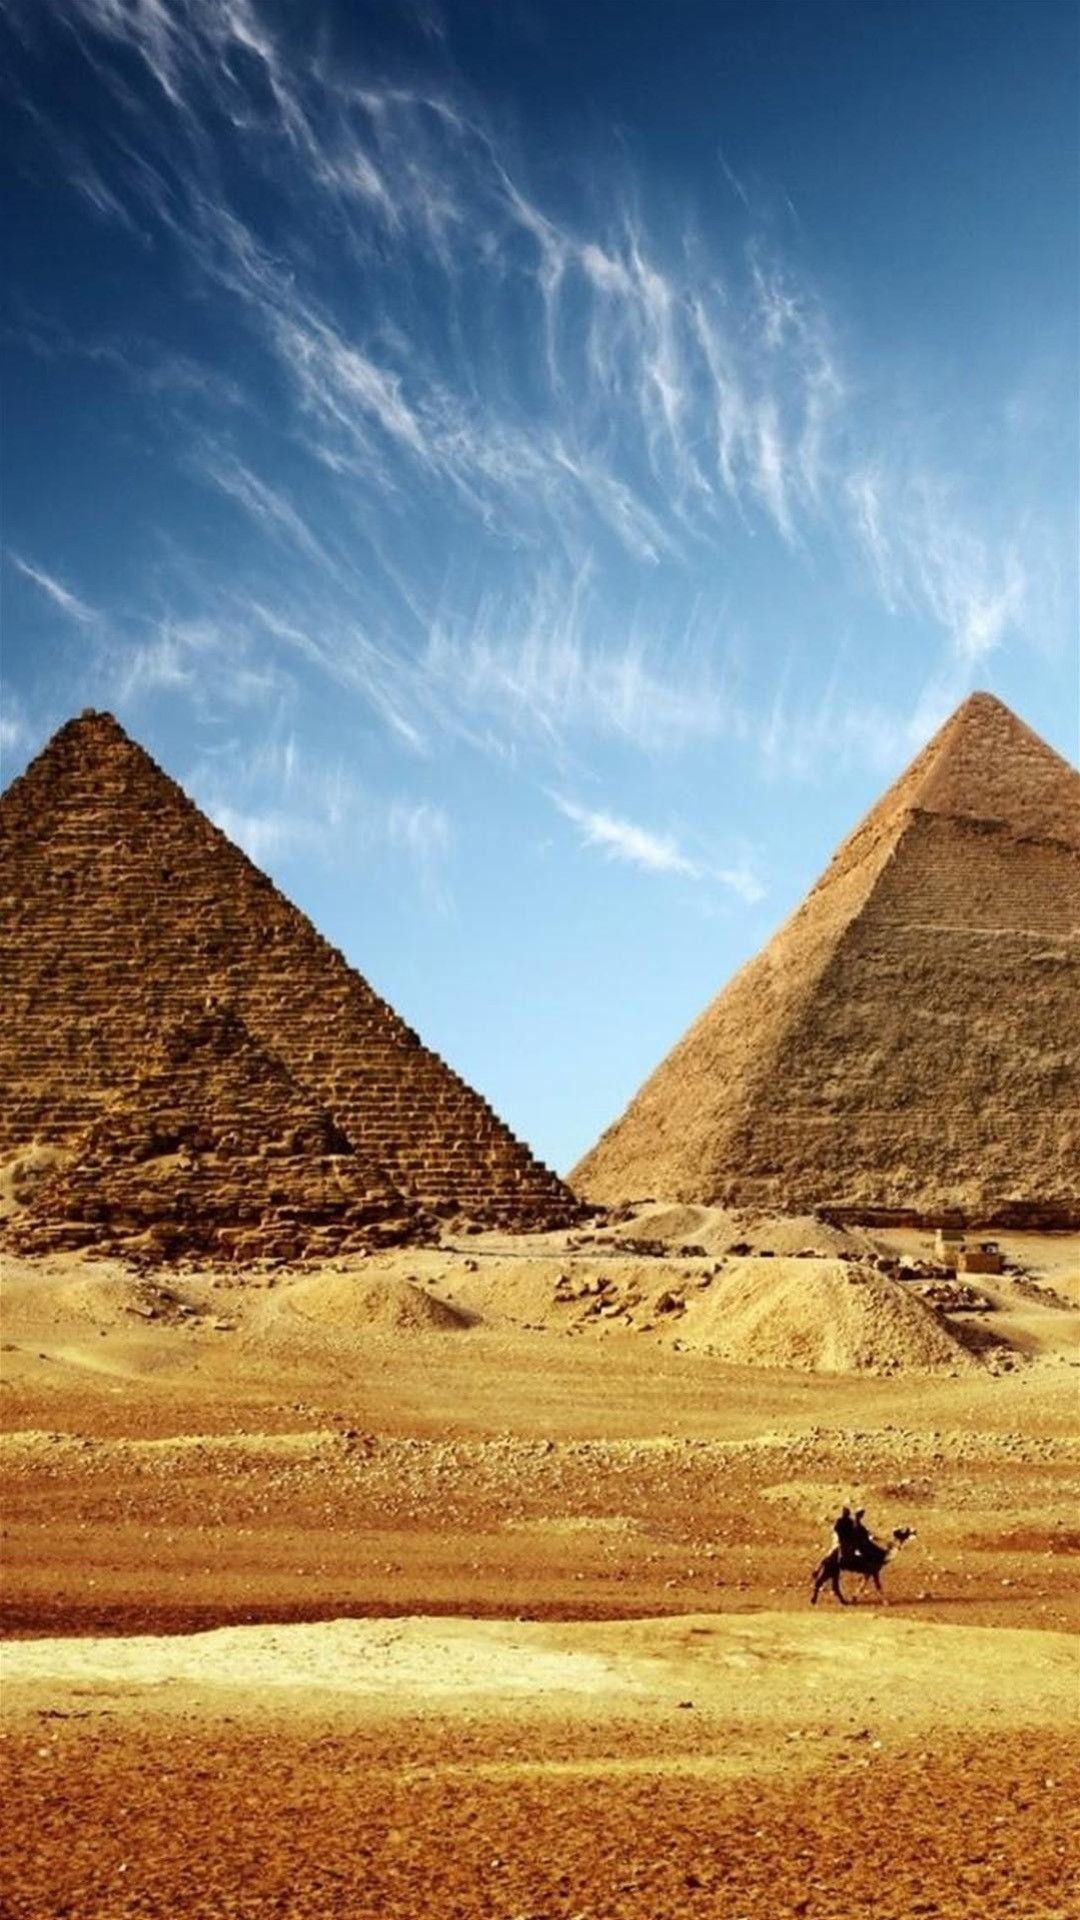 1,297 Pyramids Camel Stock Video Footage - 4K and HD Video Clips |  Shutterstock